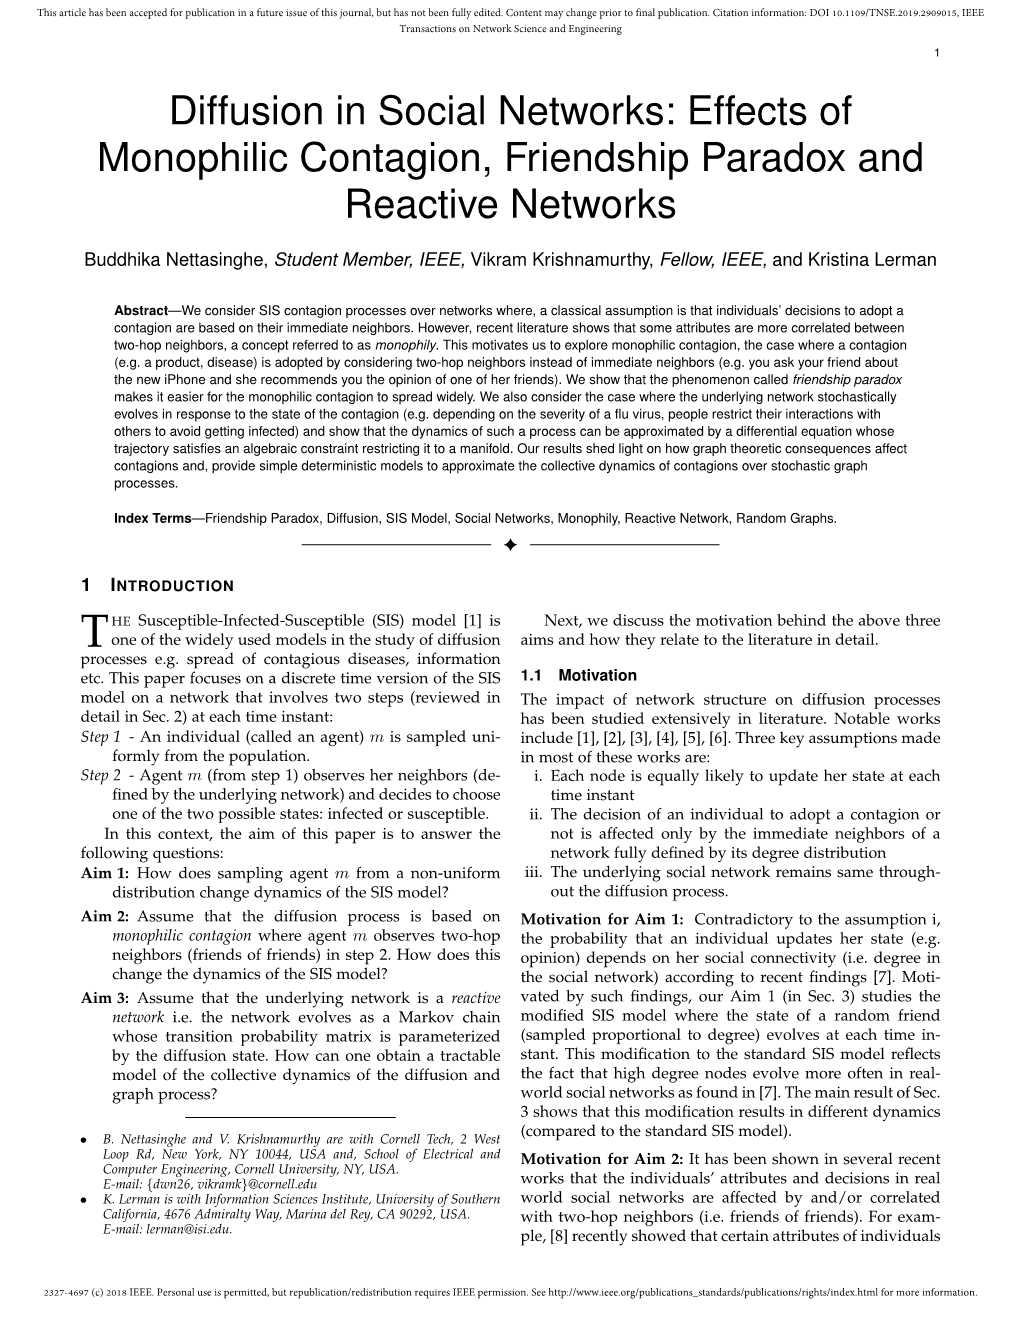 Diffusion in Social Networks: Effects of Monophilic Contagion, Friendship Paradox and Reactive Networks